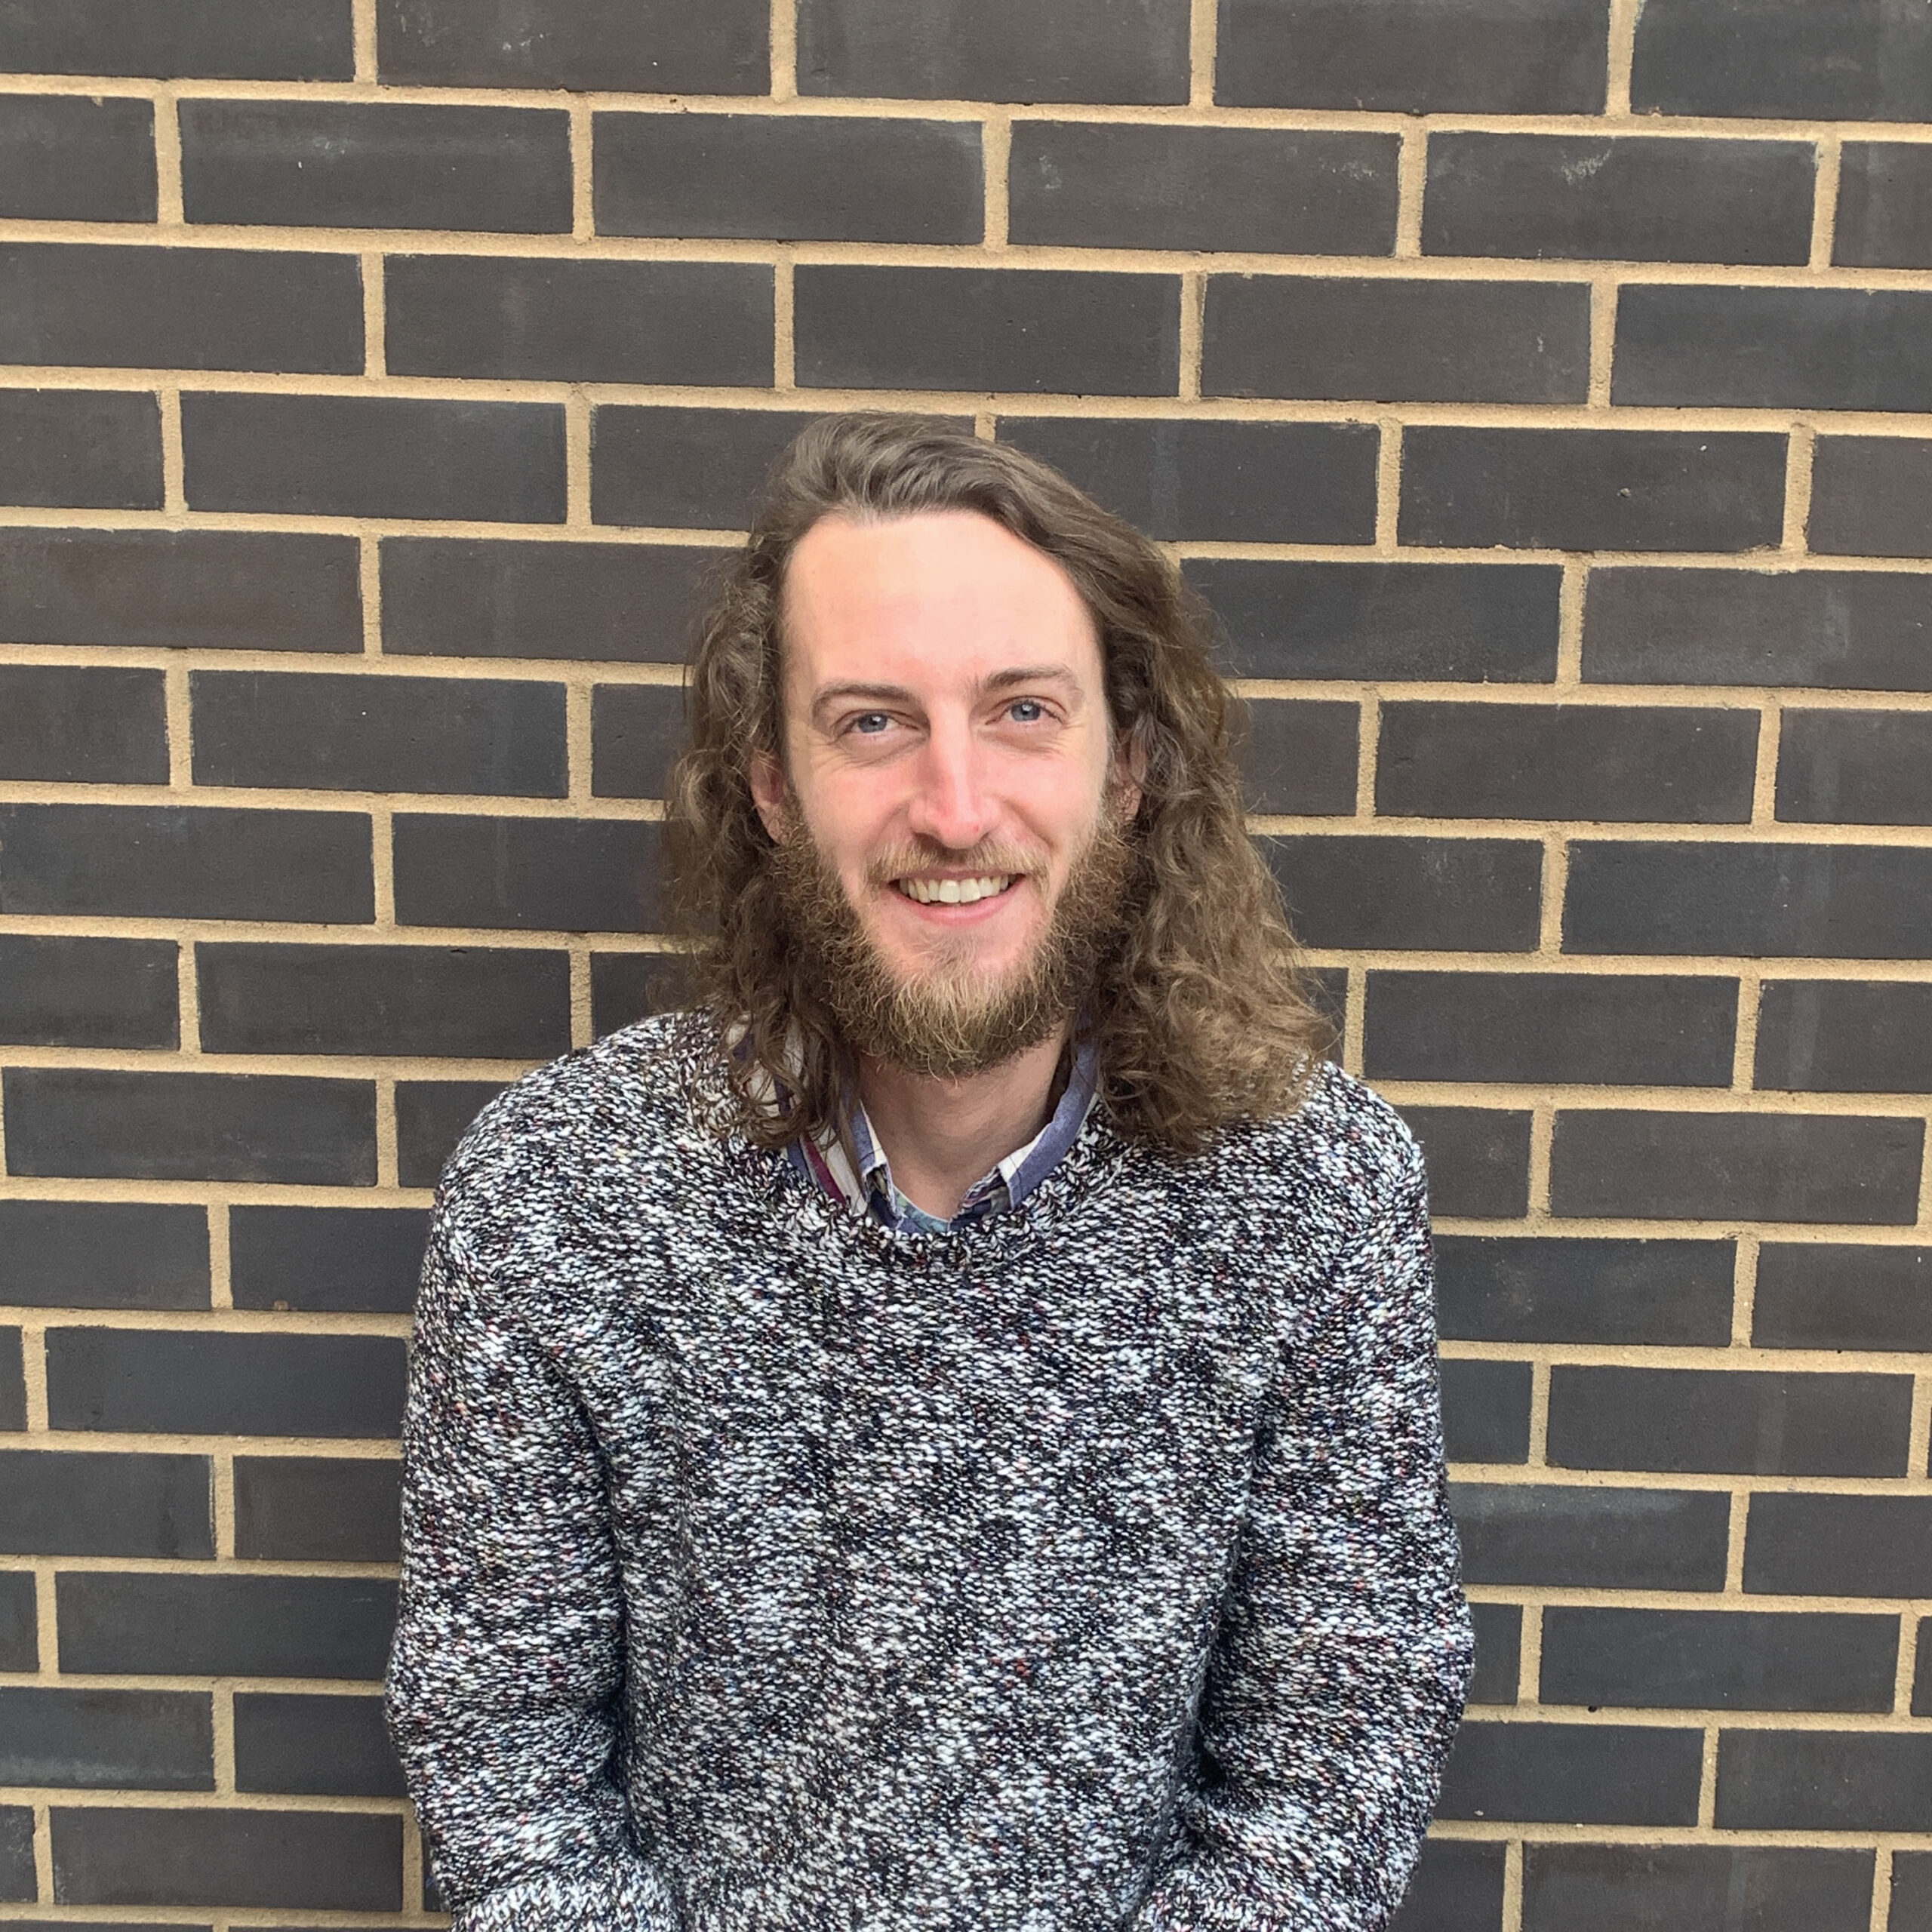 A medium shot of Rhys, an NN Ambassador. Rhys is white with shoulder length brown hair, wearing a grey and white speckled jumper and is smiling at the camera. Rhys is standing with a grey brick wall behind him.